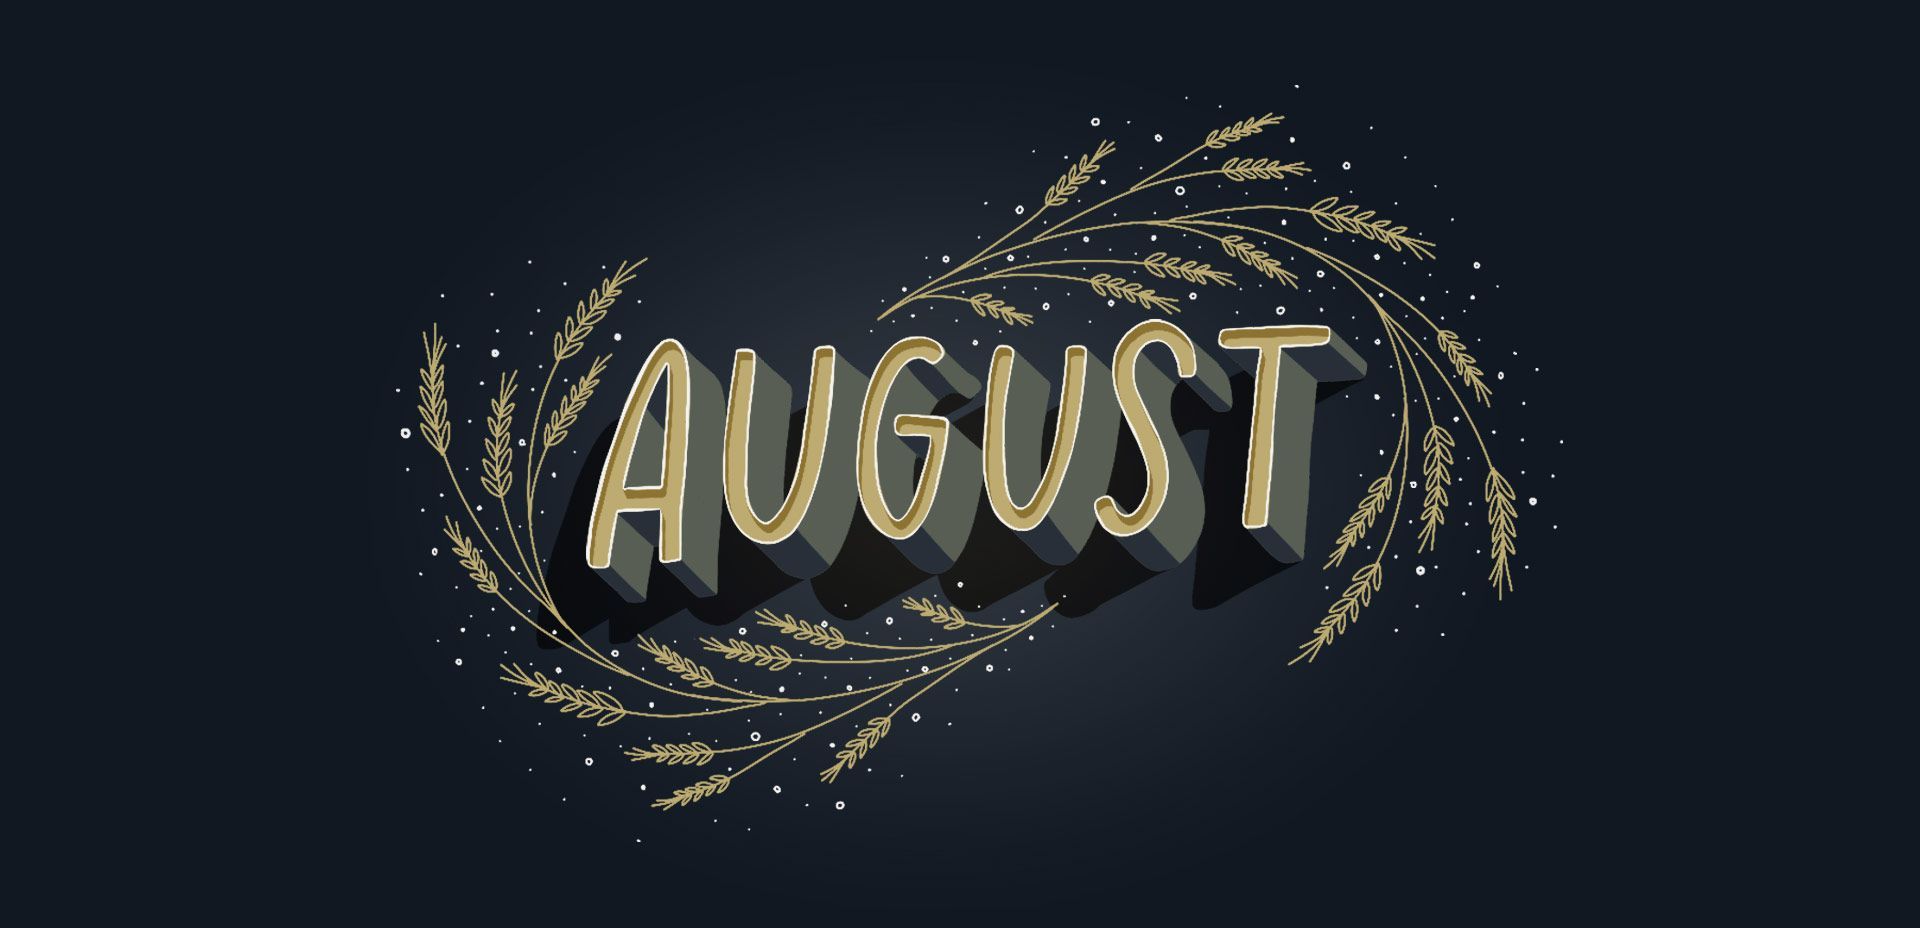 The word august is written in gold on a black background - August